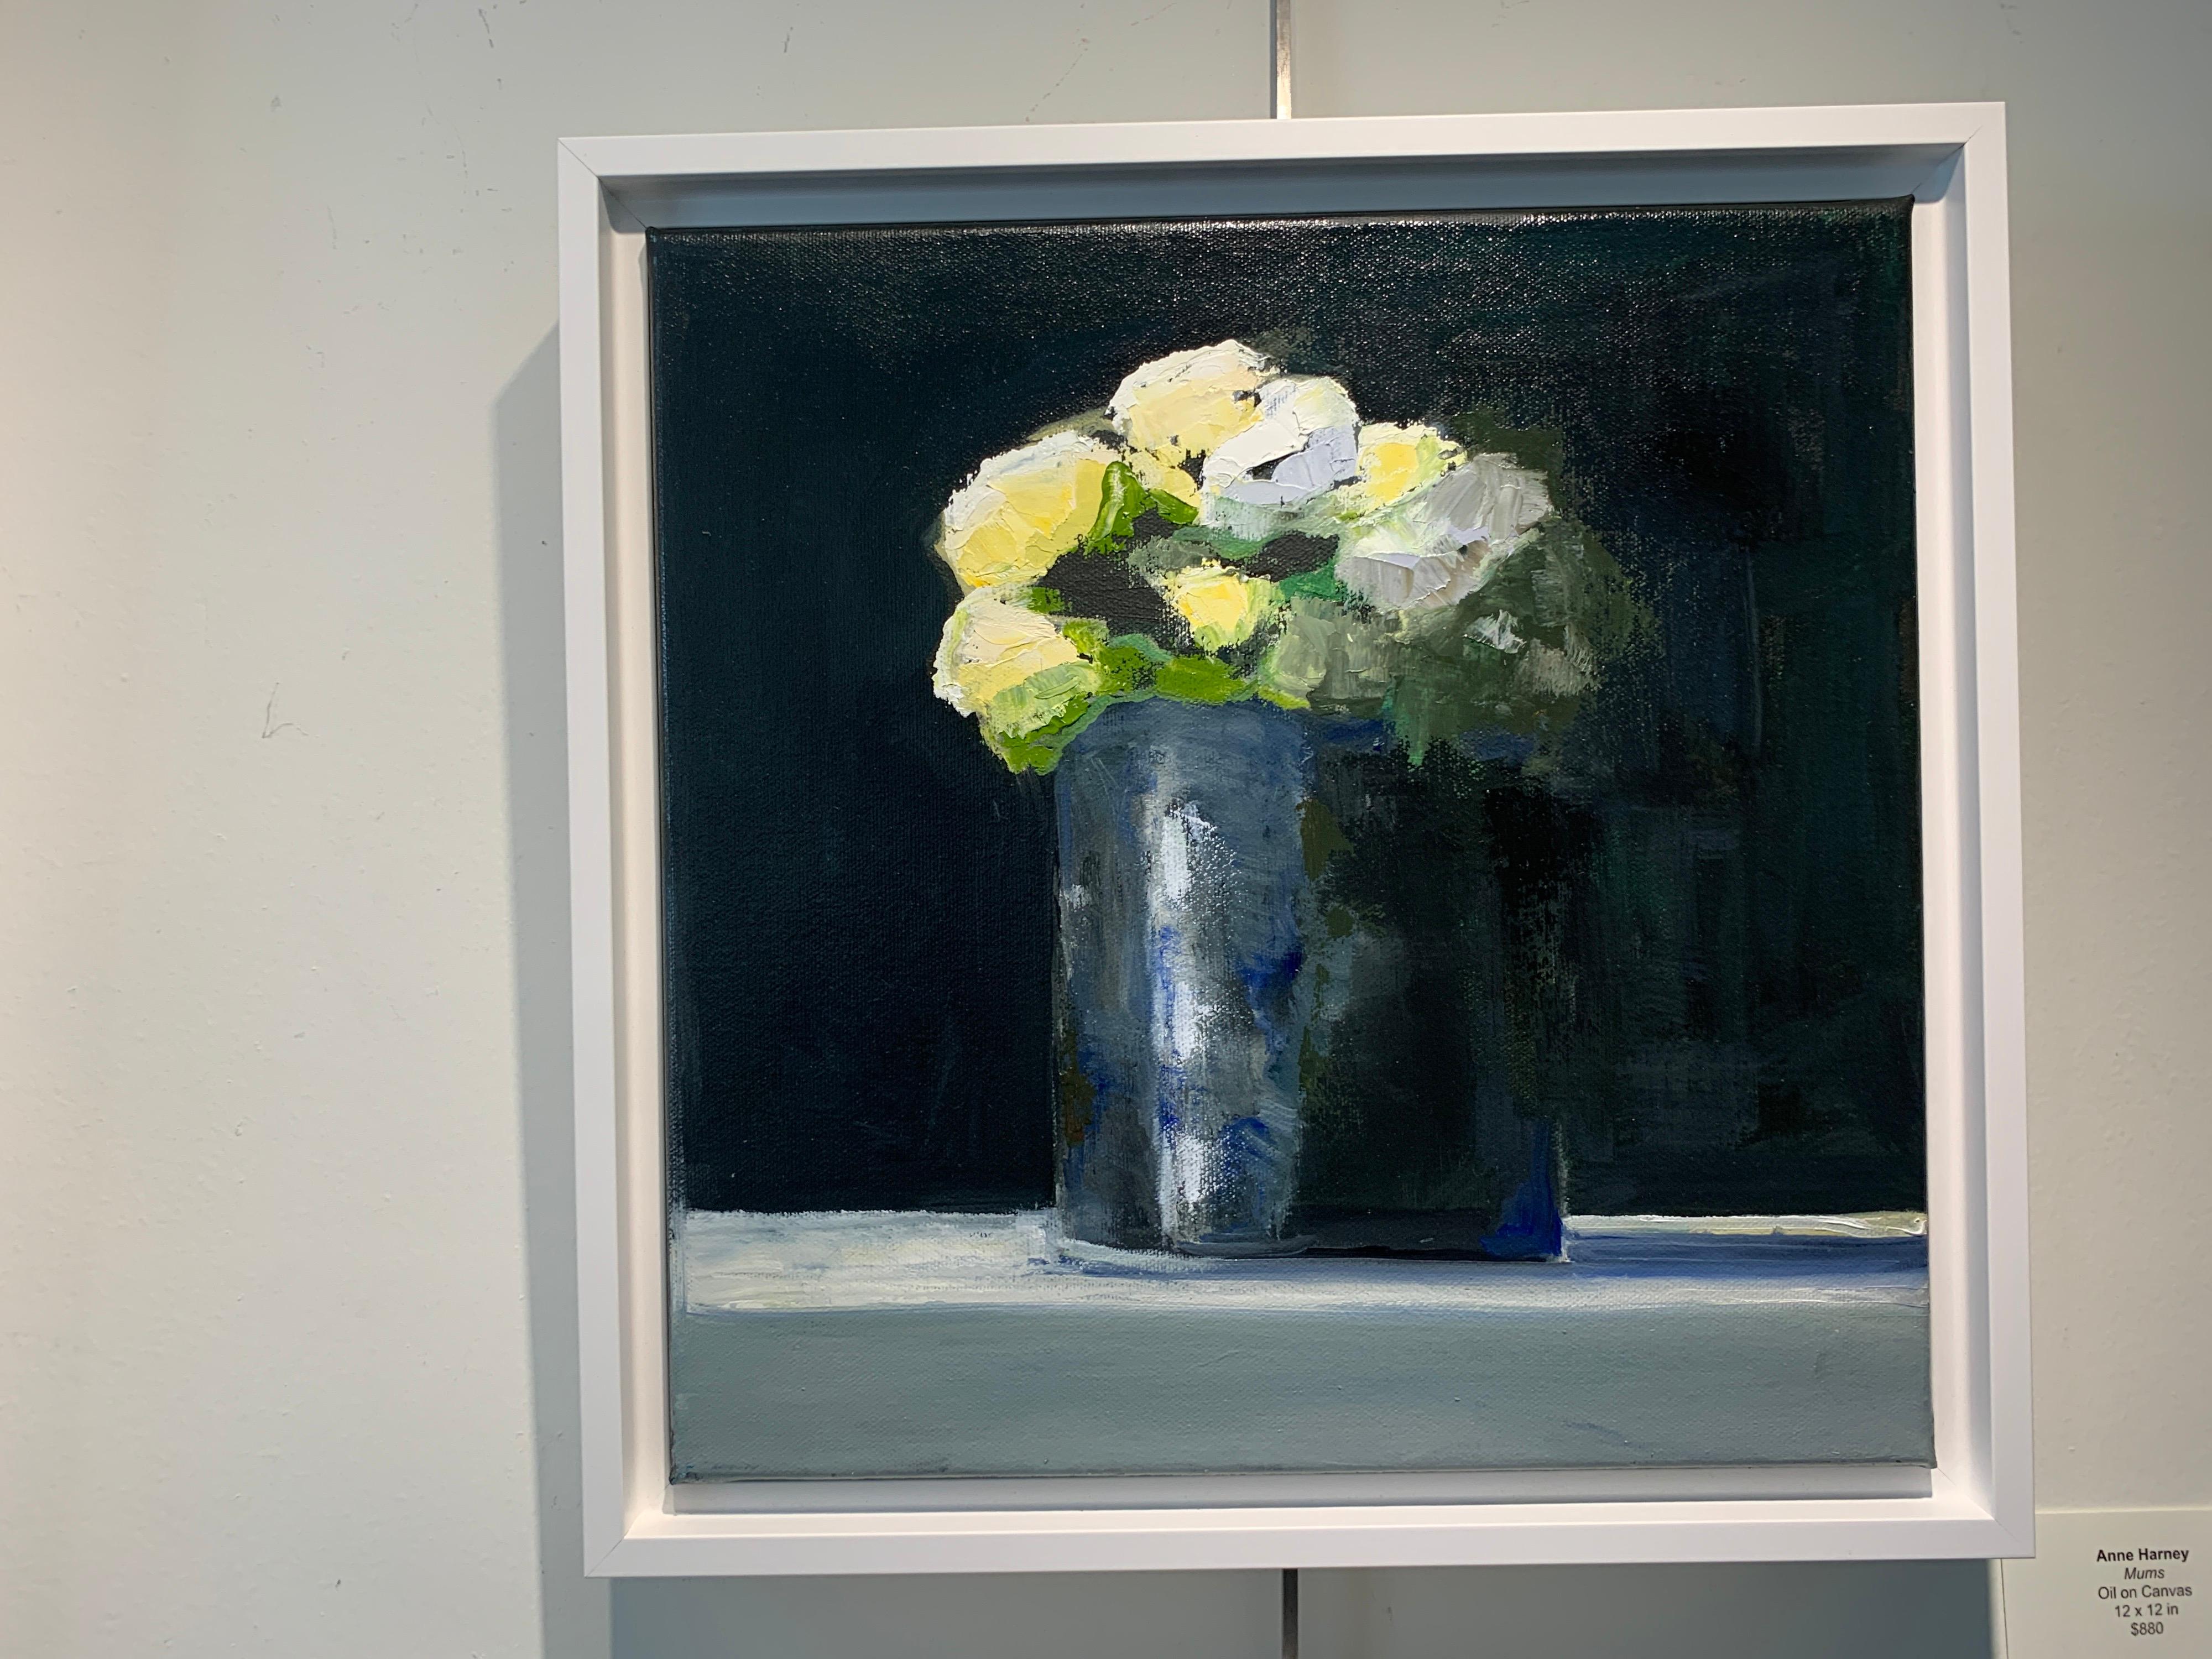 Mums by Anne Harney, Contemporary Floral Still Life Painting 3